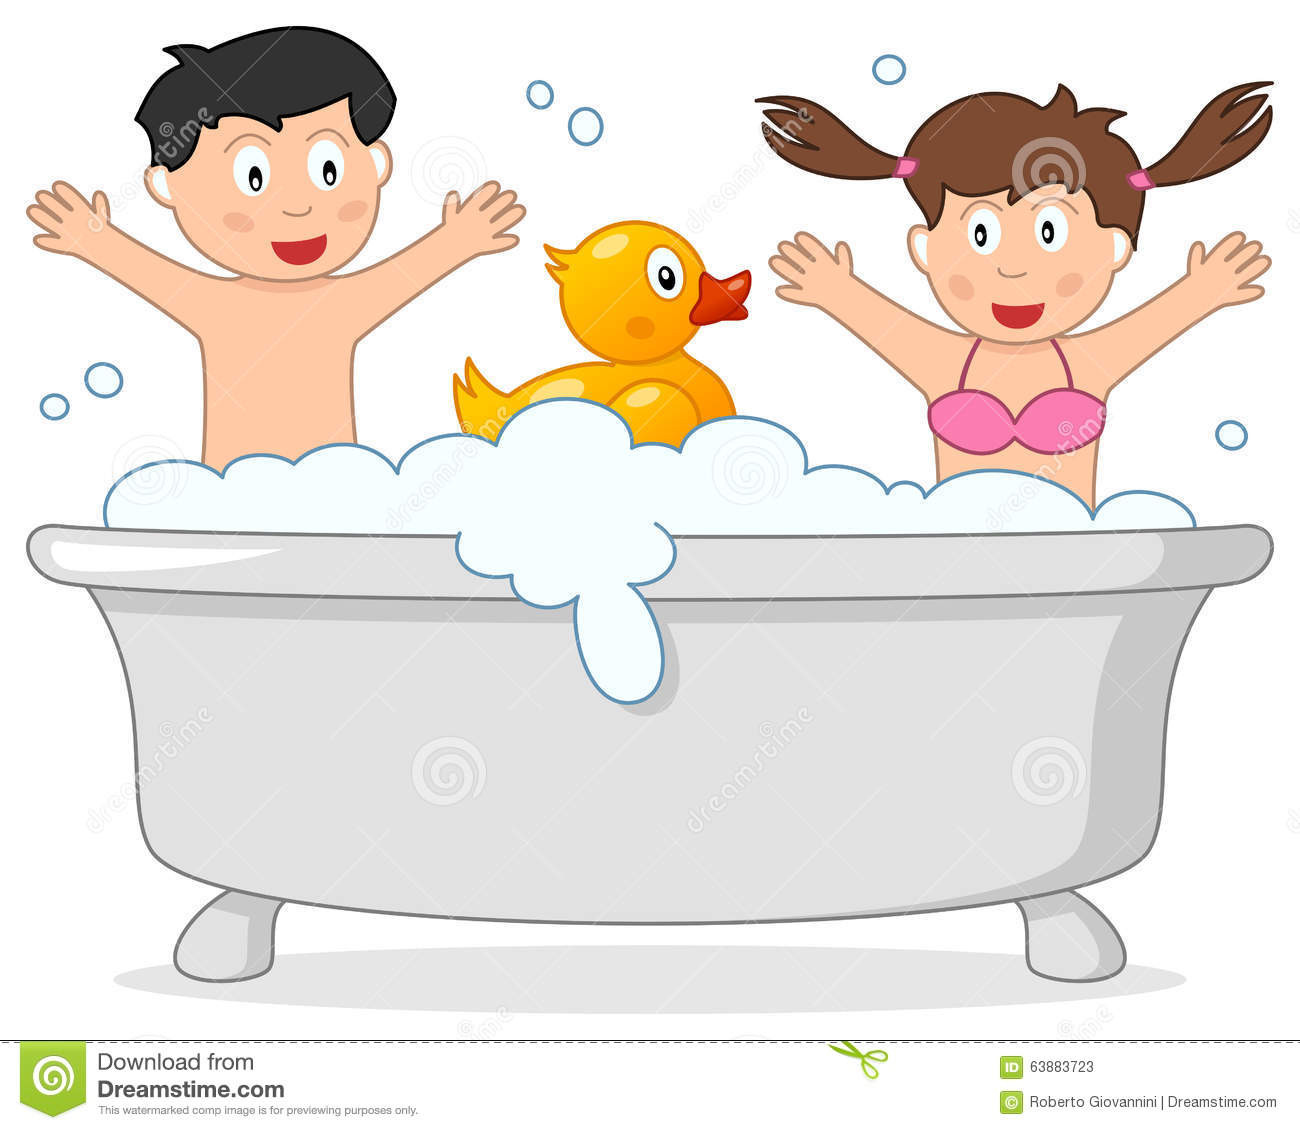 Bathroom Clipart For Kids
 Bath Time With Two Kids & Rubber Duck Stock Vector